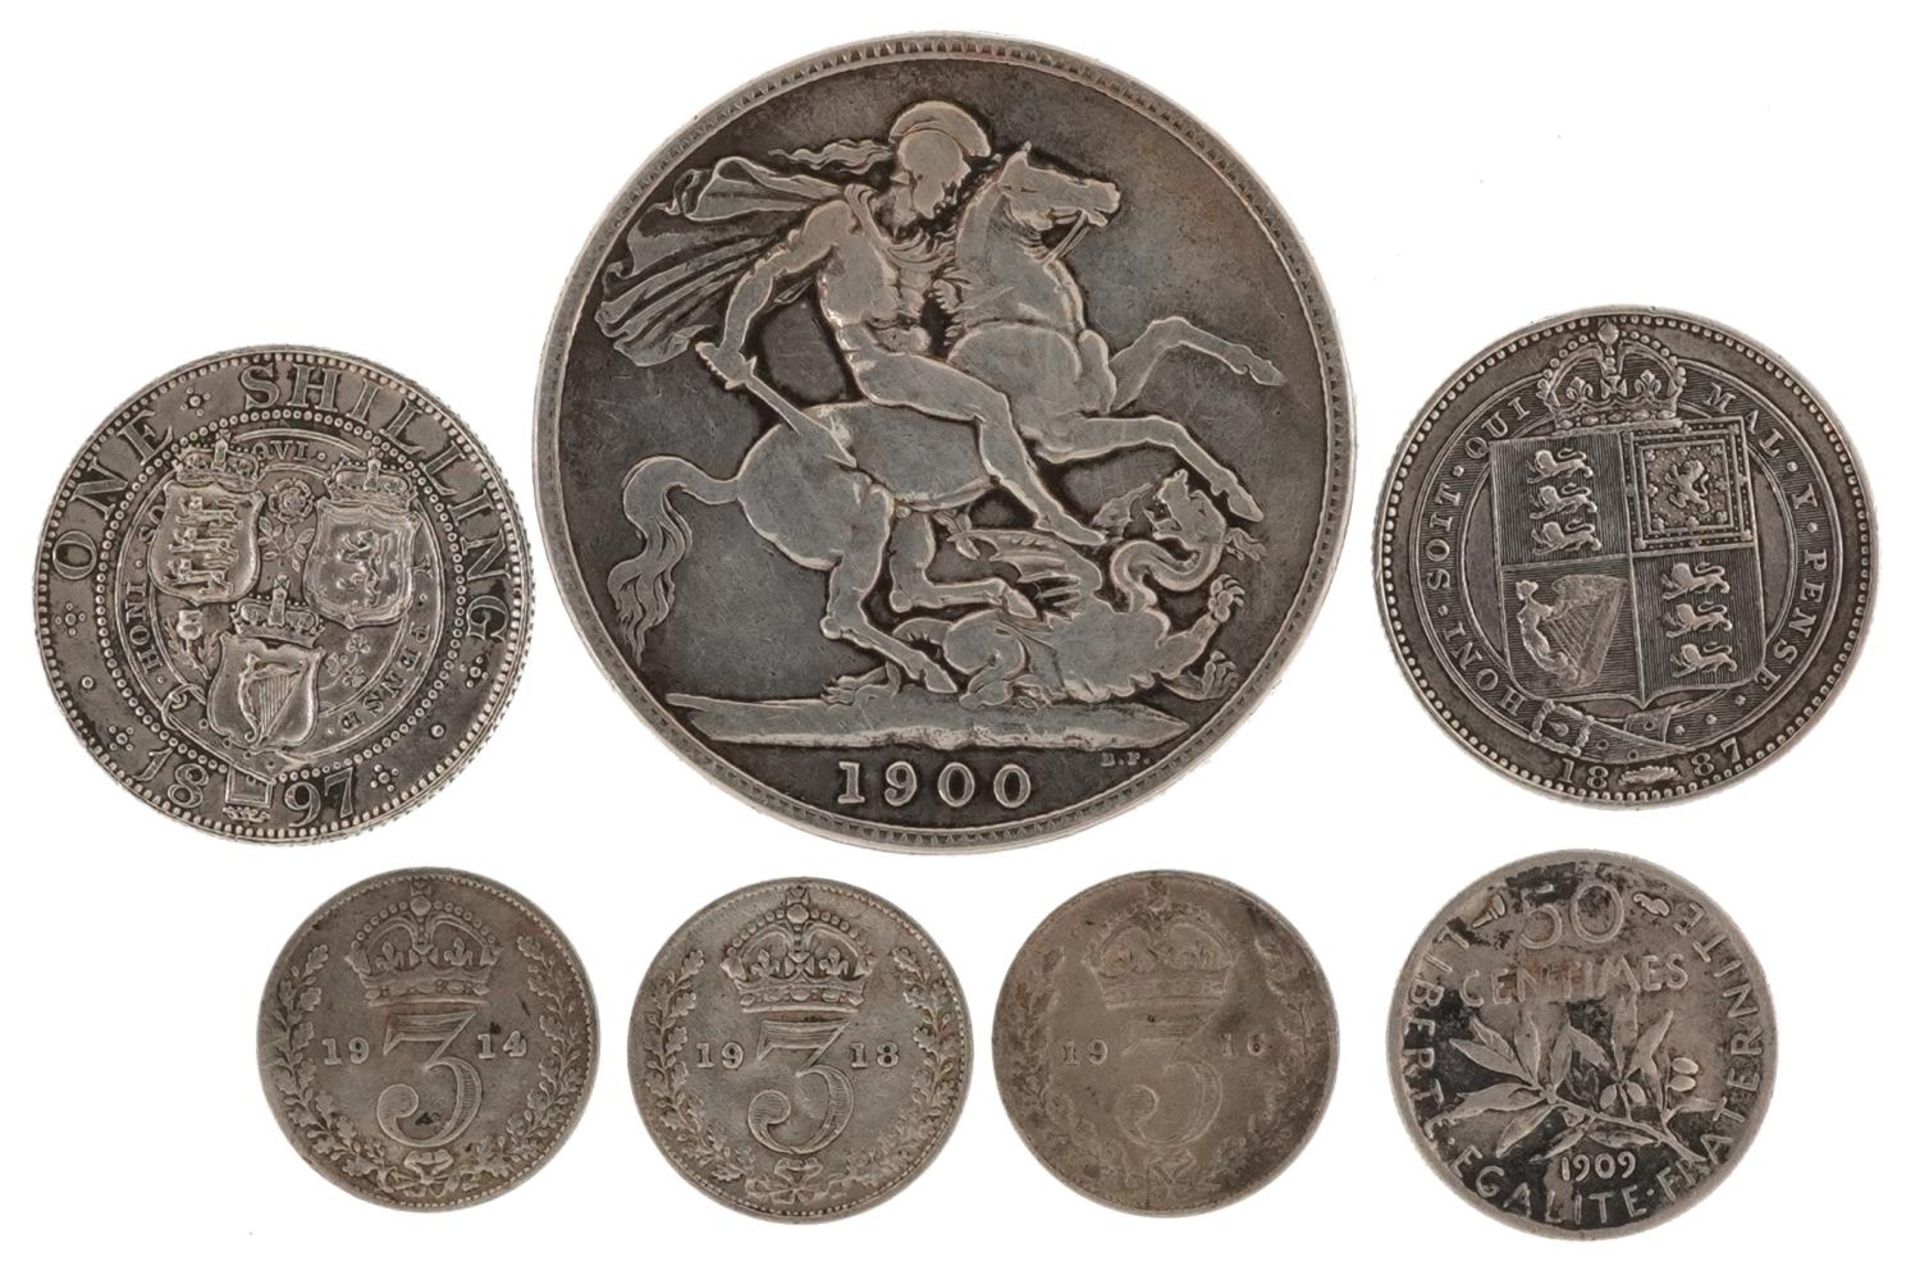 Victorian and later British coinage and a French fifty centimes, the British coins including Queen